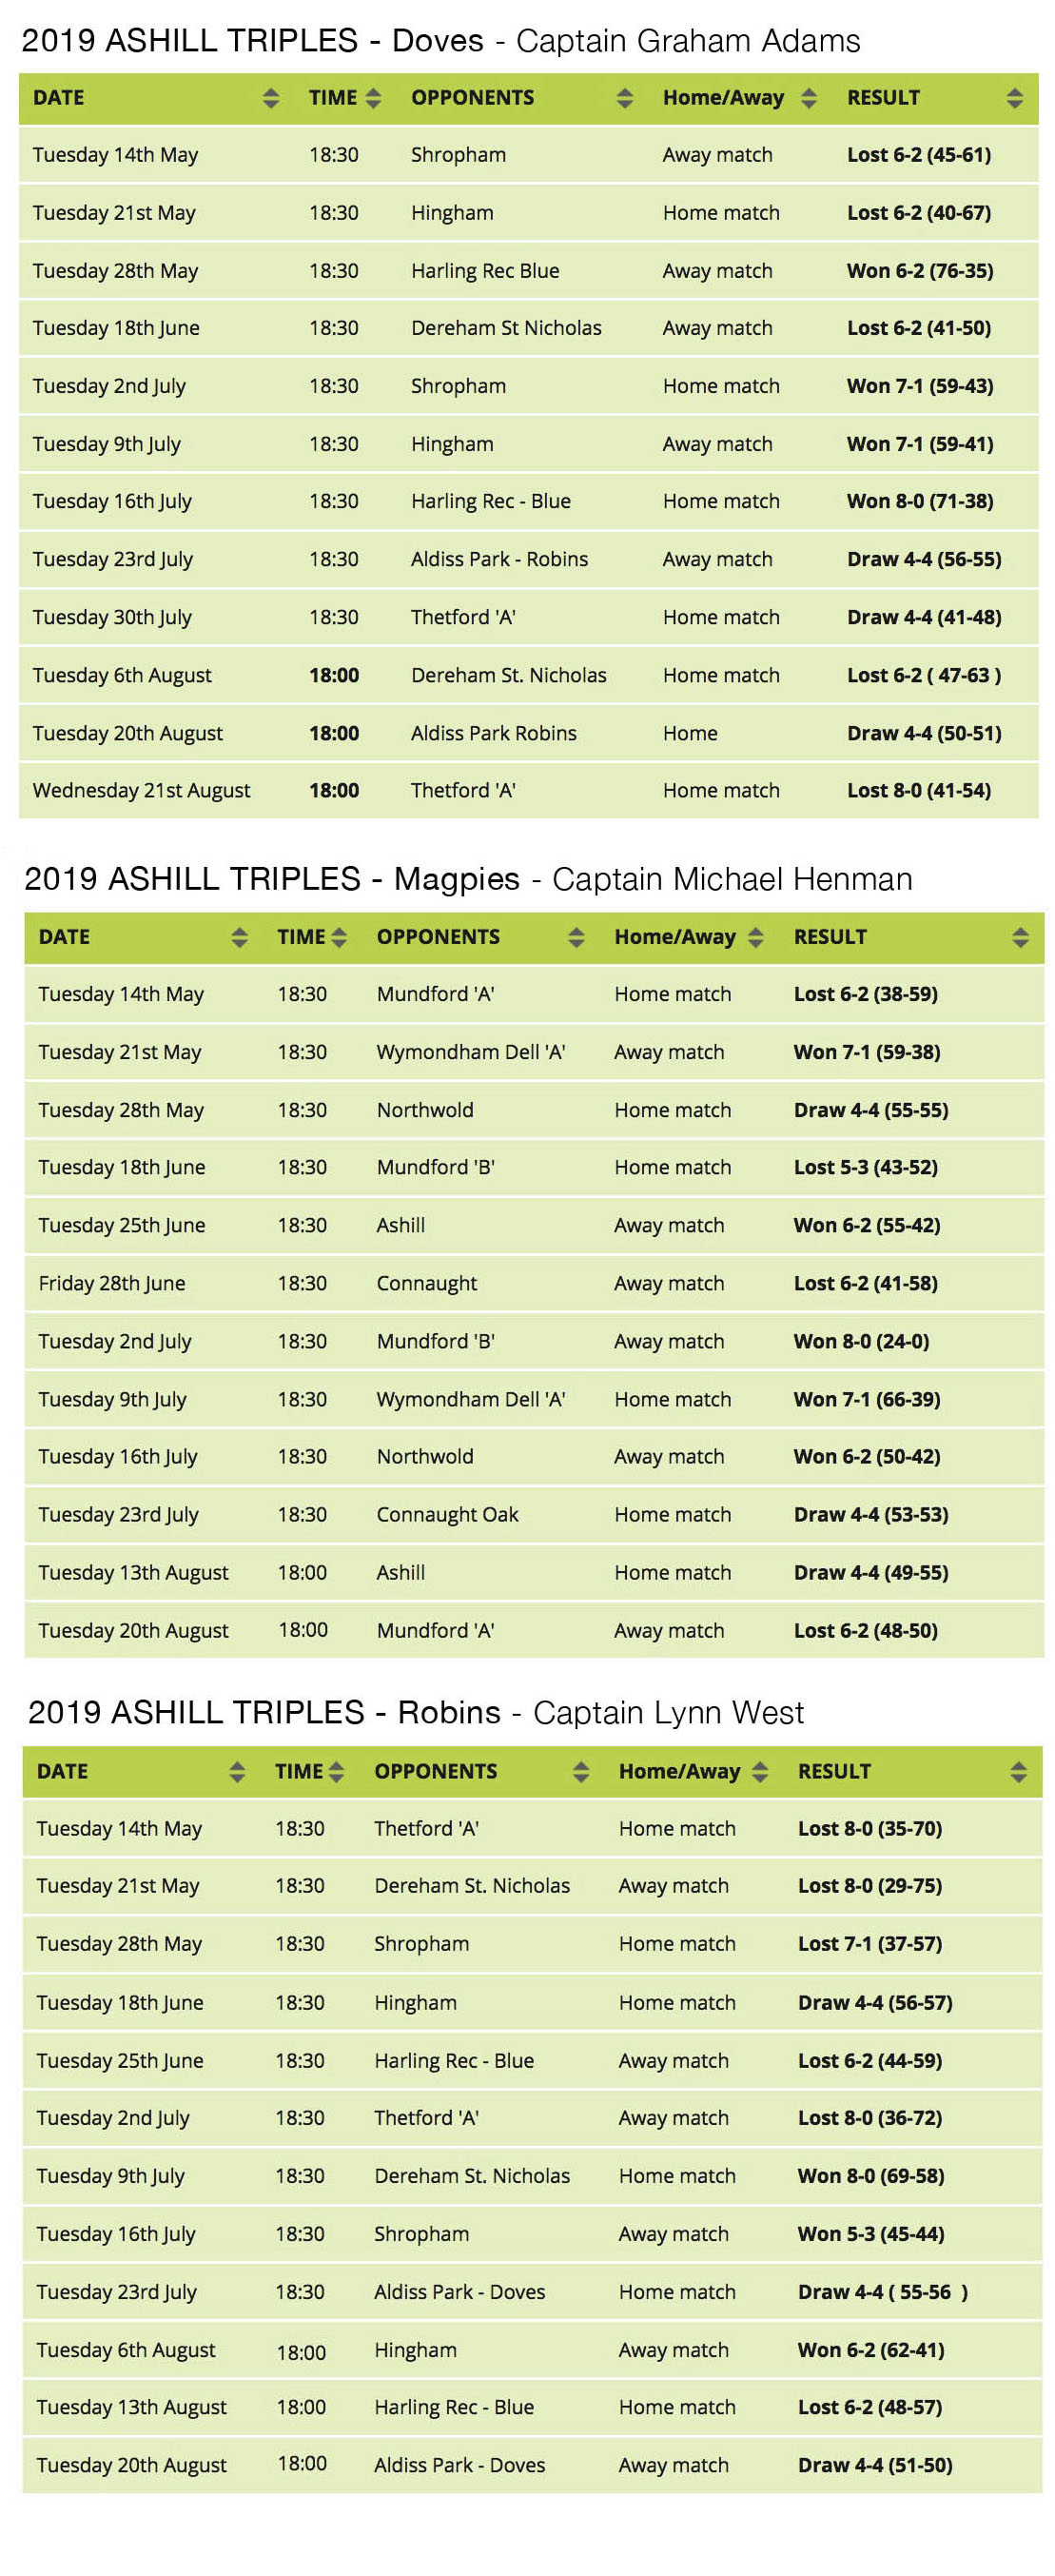 Ashill Triples - Doves, Magpies & Robins results 2019